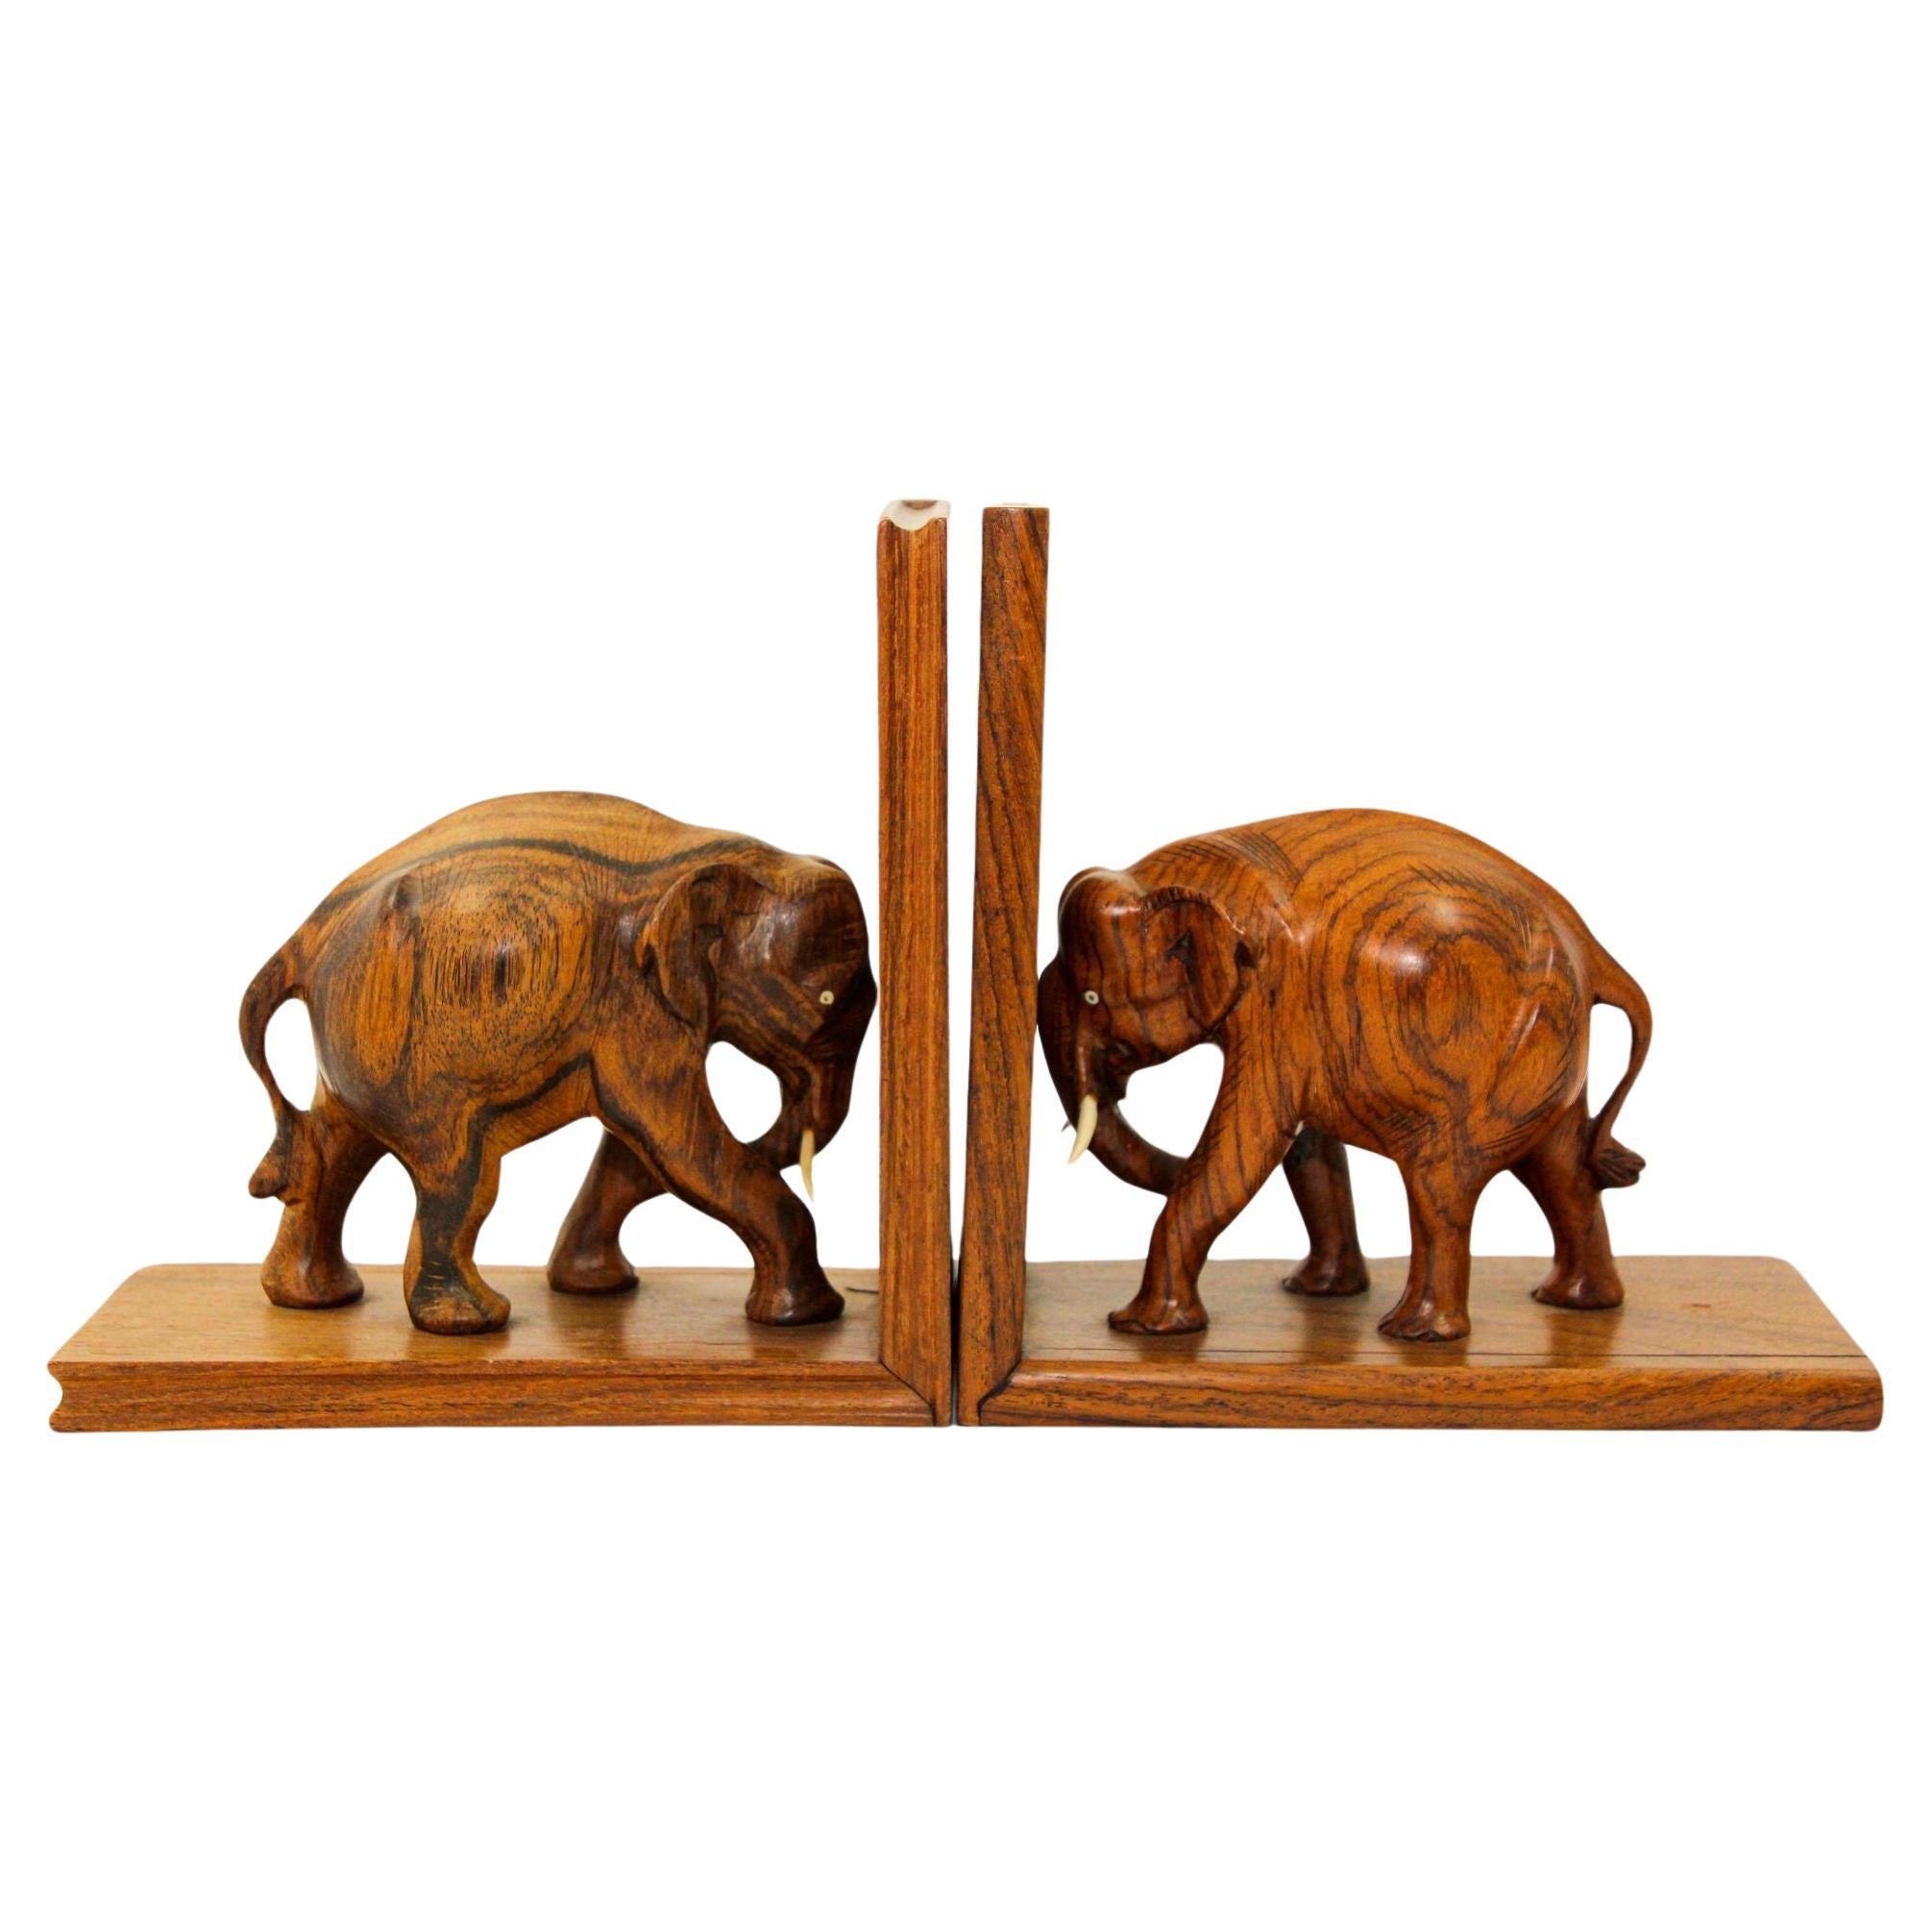 Art Deco Wooden Asian Elephant Bookends Hand Carved Rosewood India 1940s For Sale